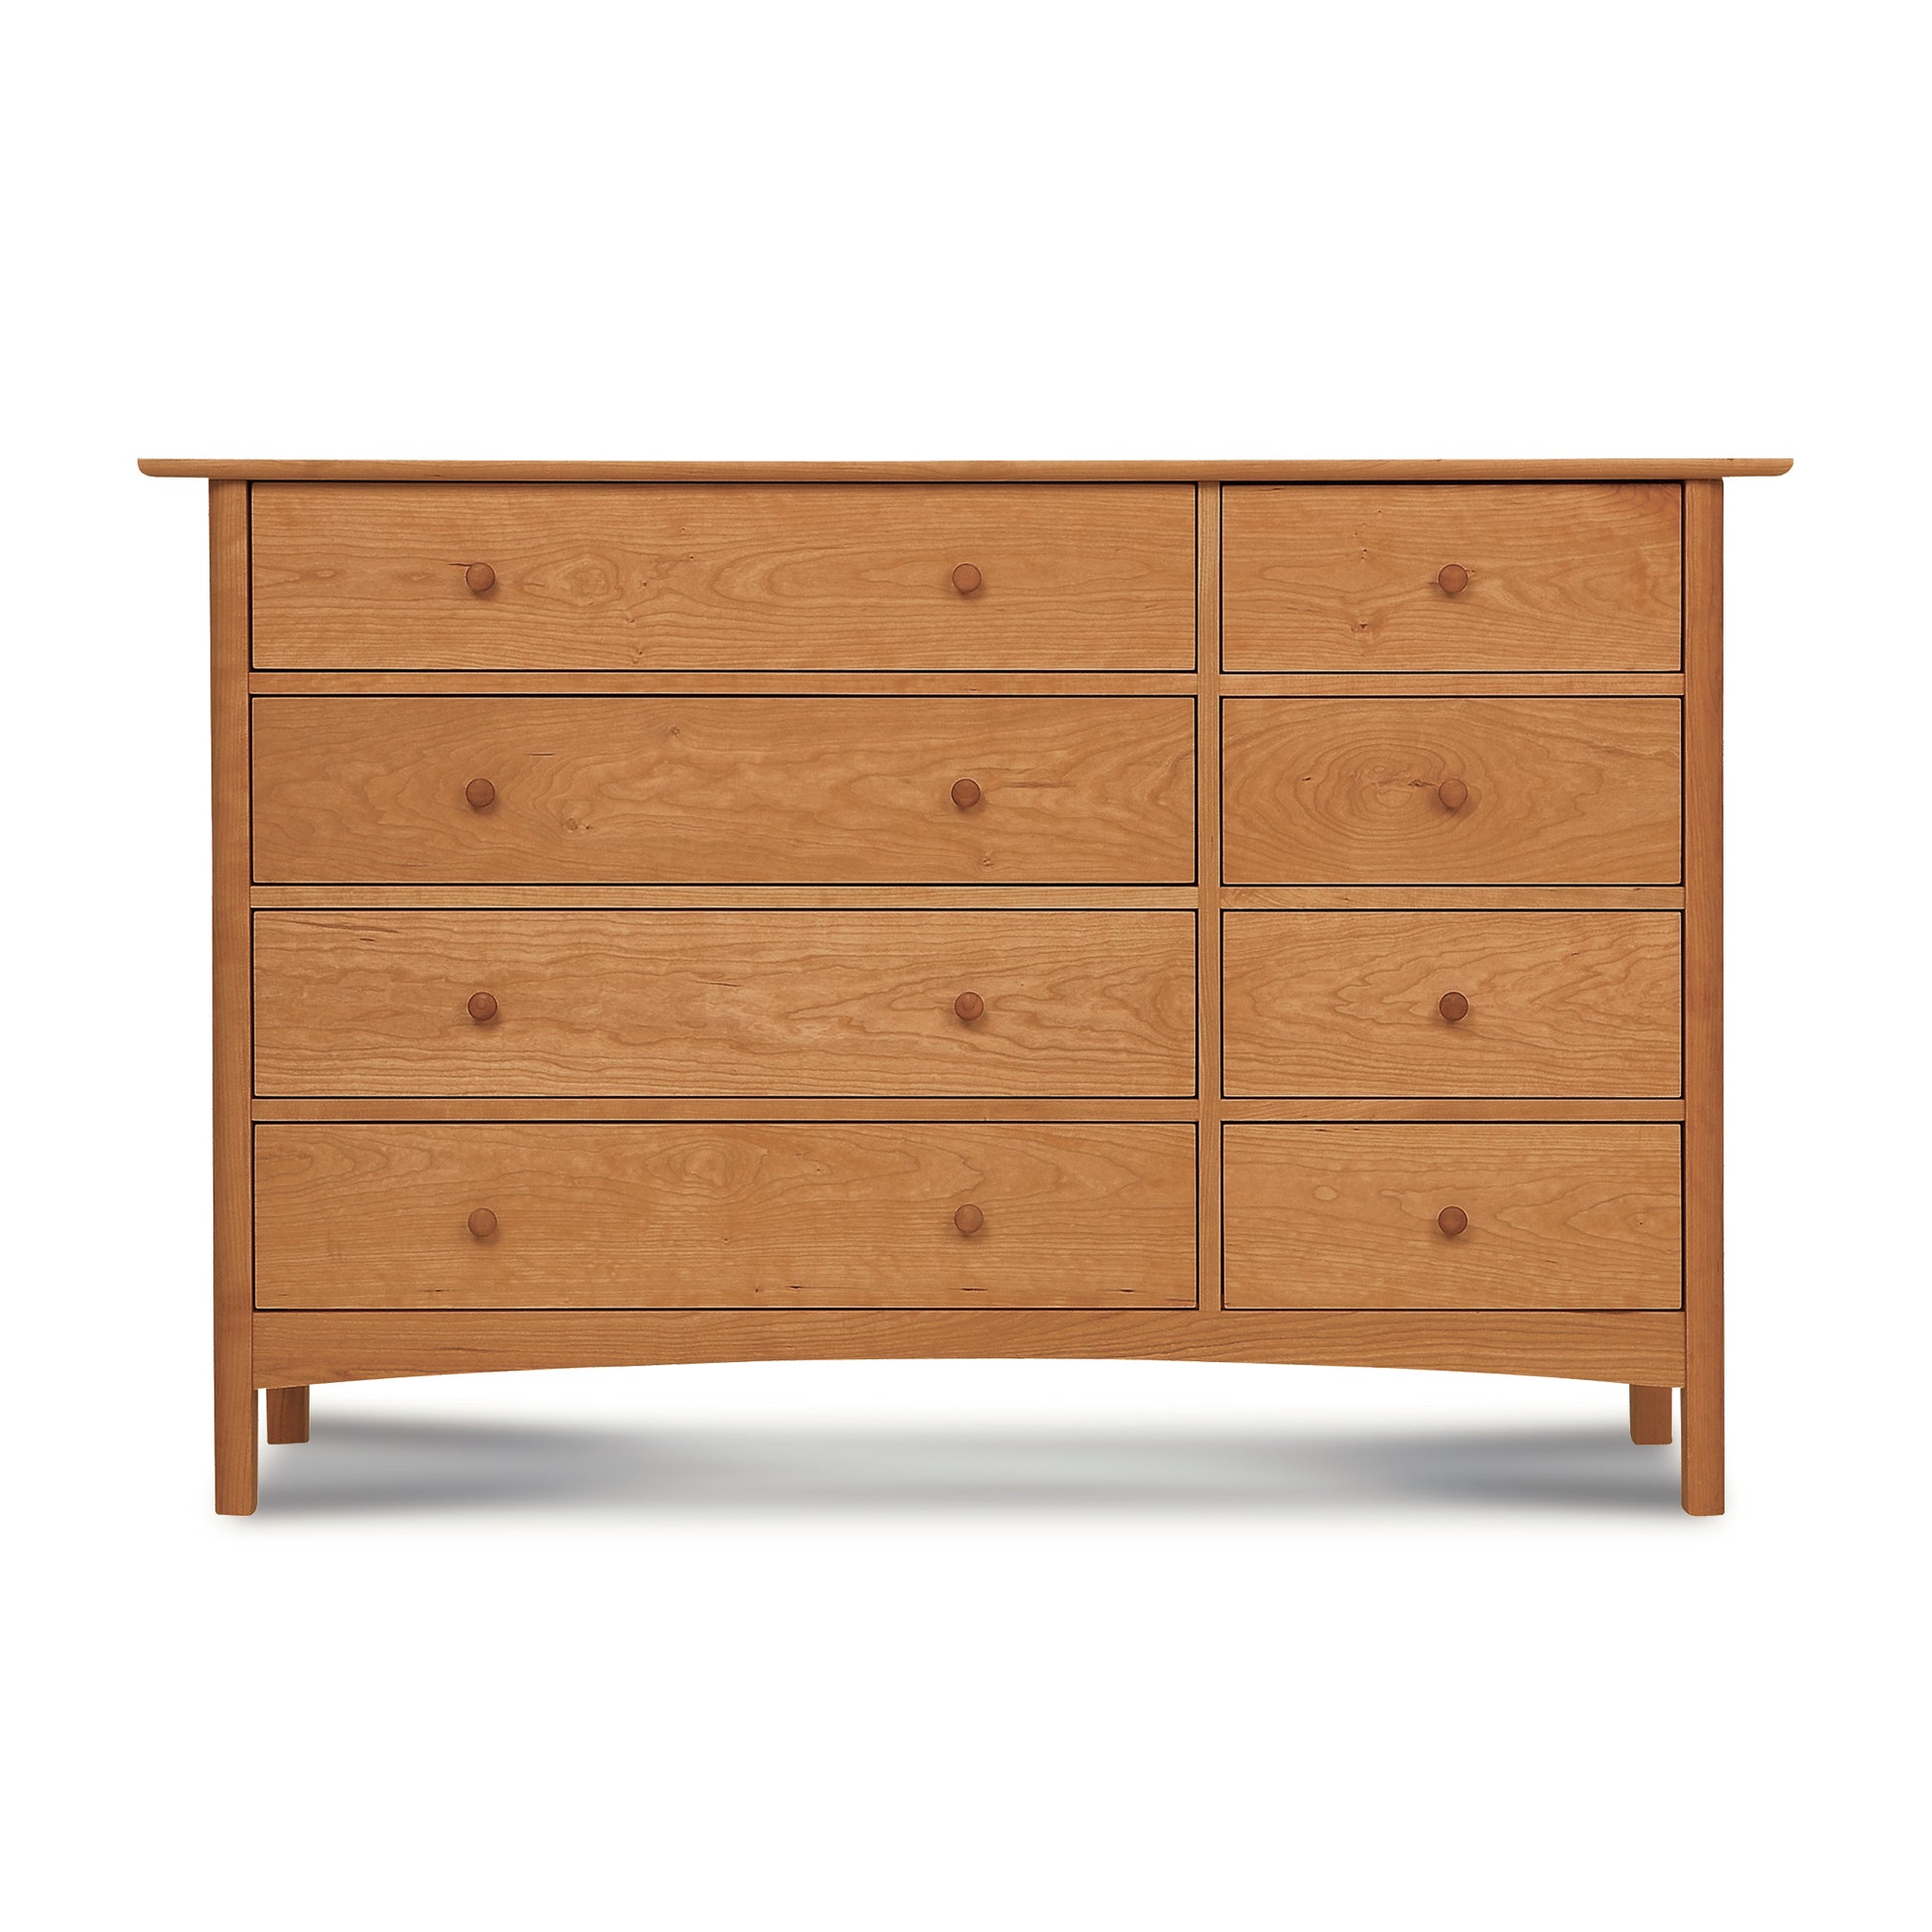 A luxury Heartwood Shaker 8-Drawer Dresser #2 by Vermont Furniture Designs, featuring drawers, on a white background.